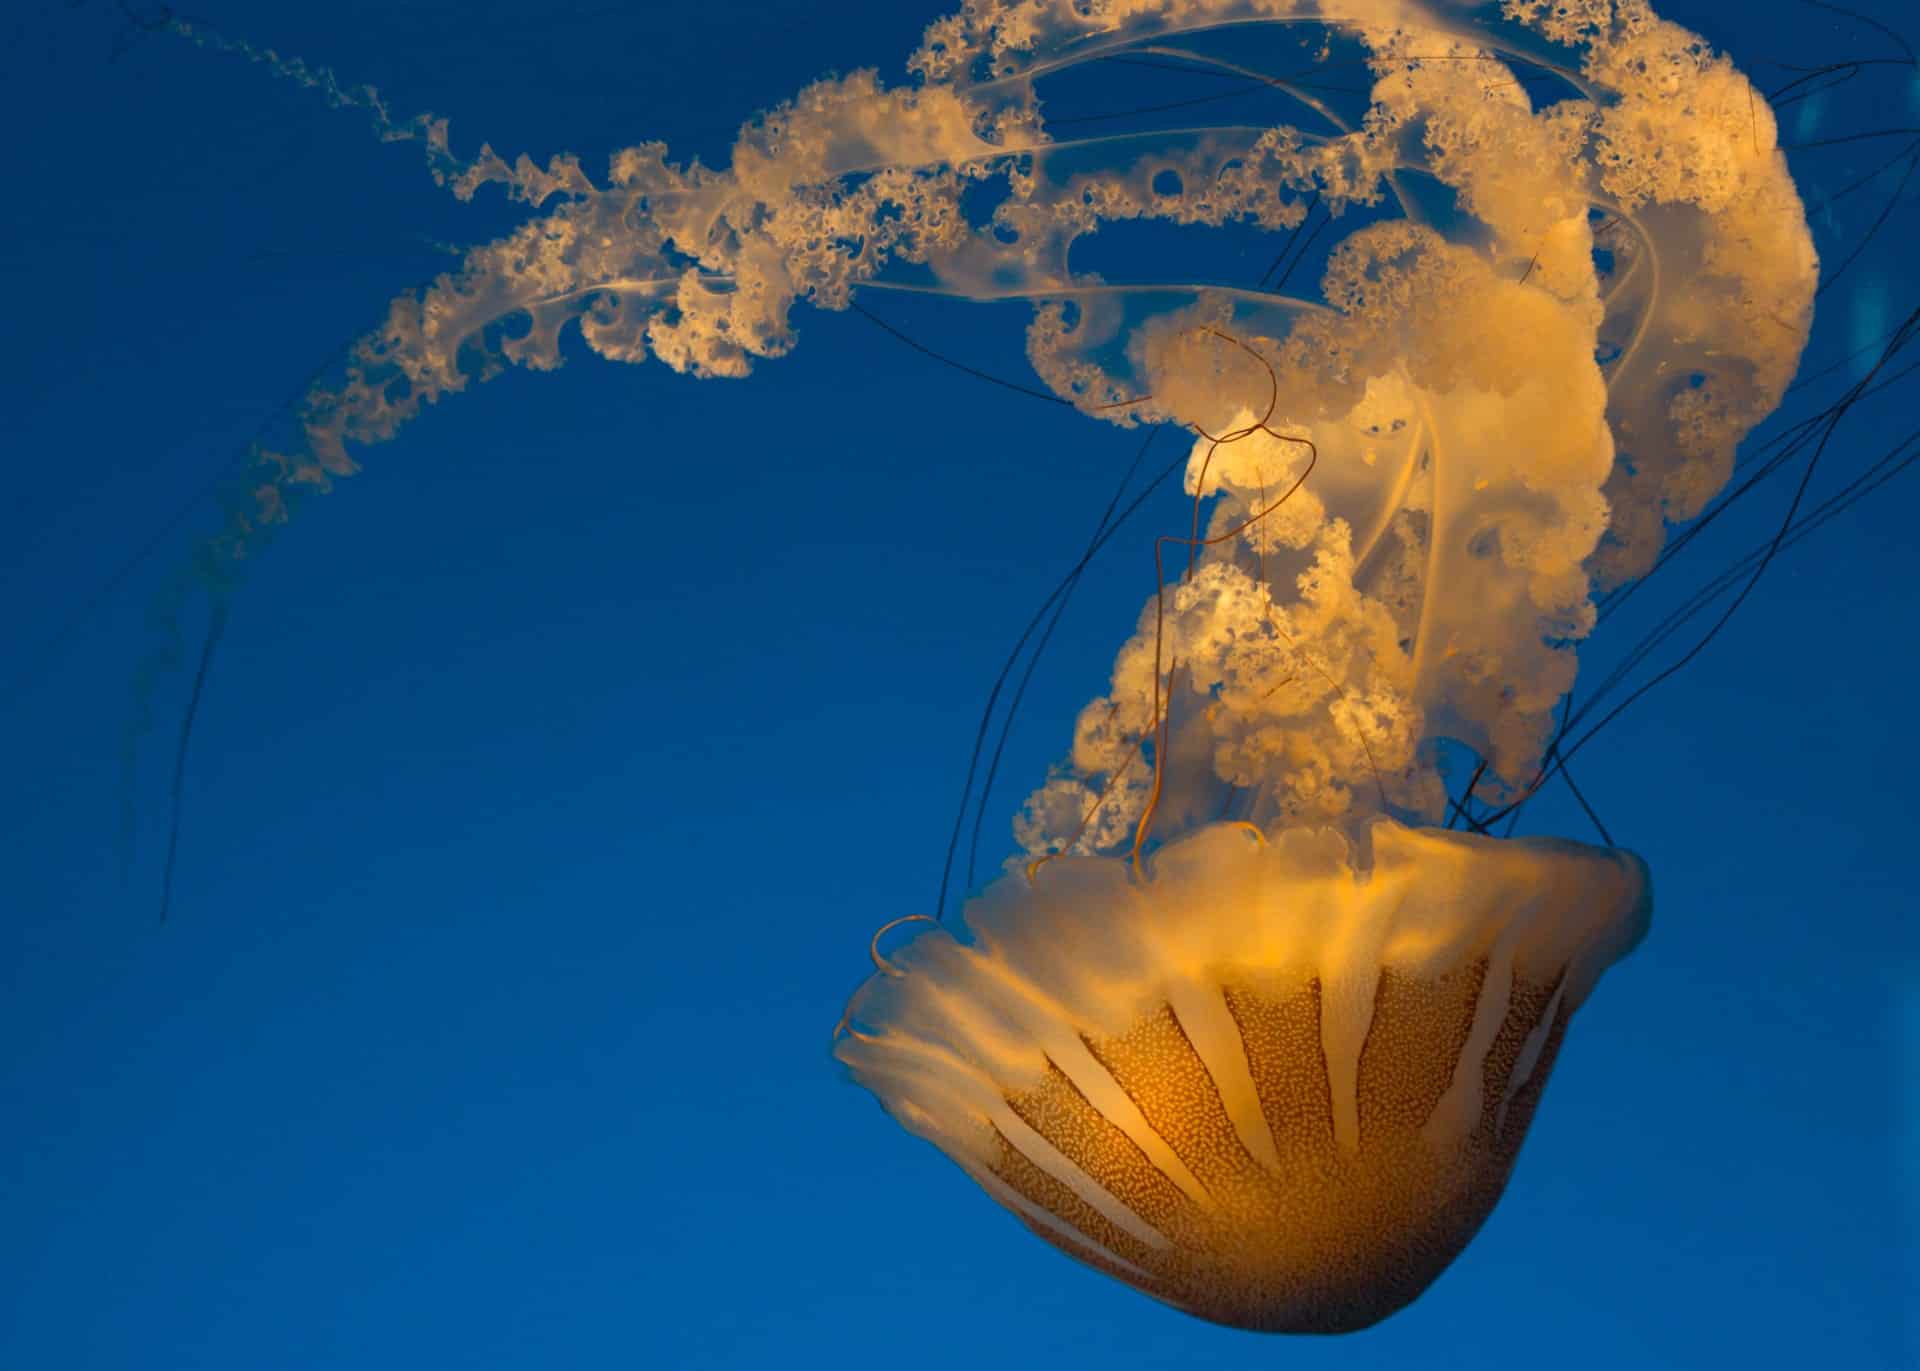 Medical Mythbuster: Can You Really Die from a Jellyfish Sting?